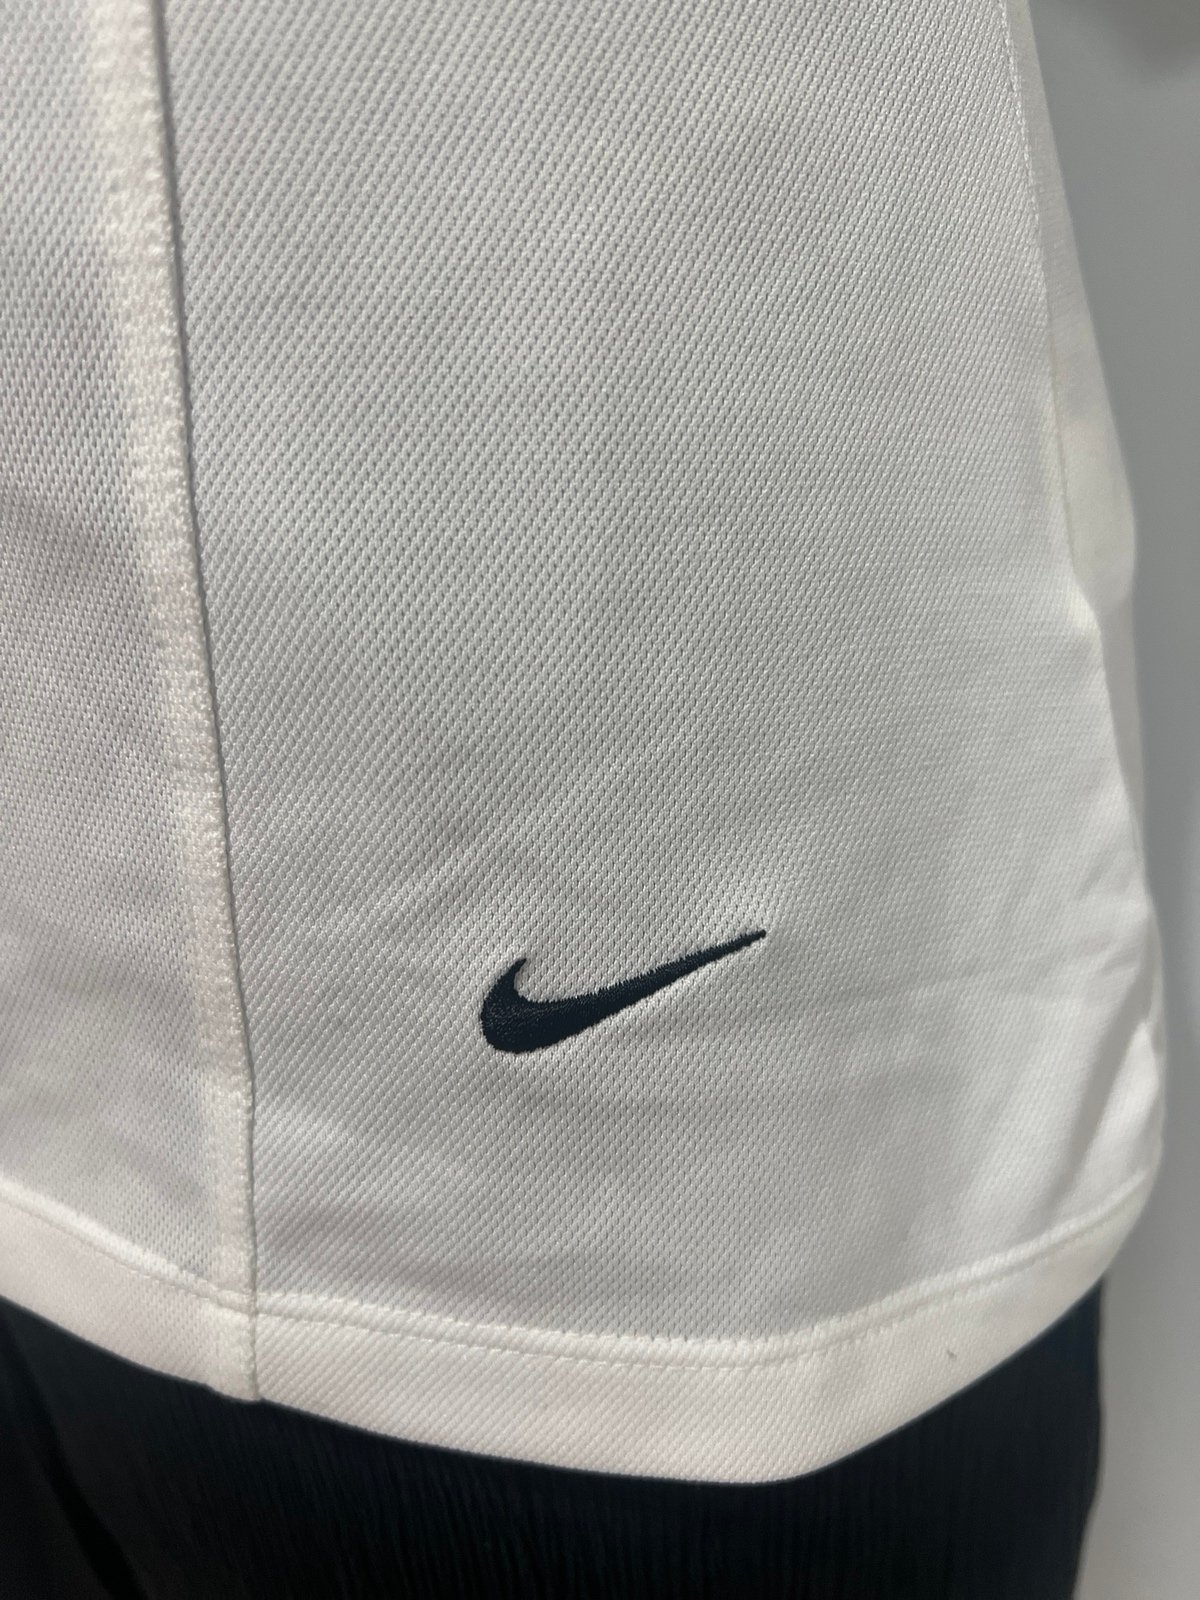 floor price Nike womens golf Polo N5hzOUw8X Outlet Store